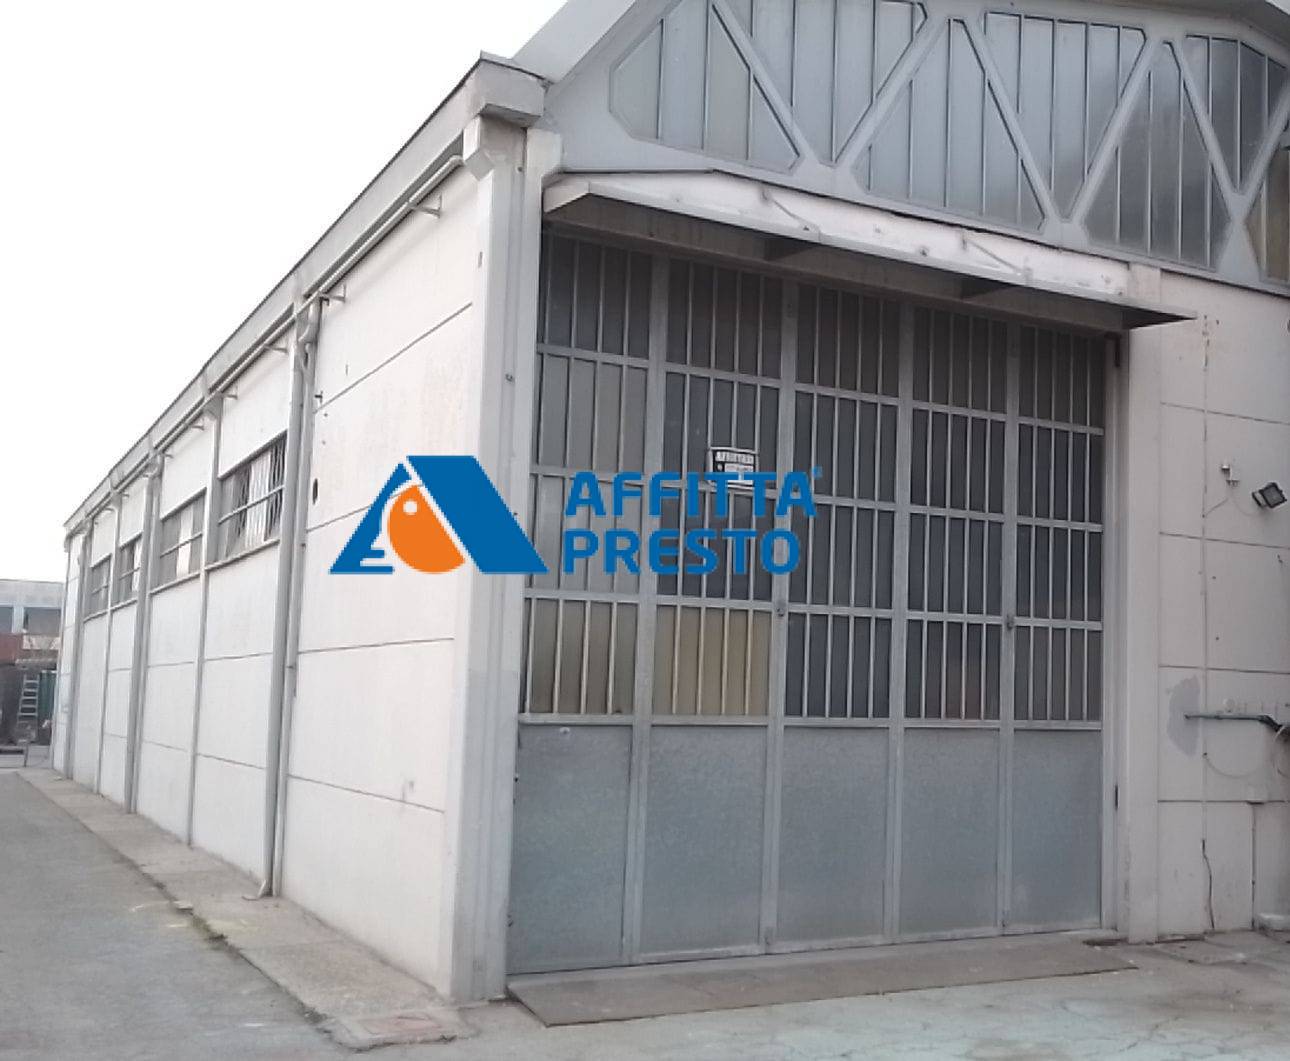 Attivit? commerciale in affitto/gestione a Ravenna